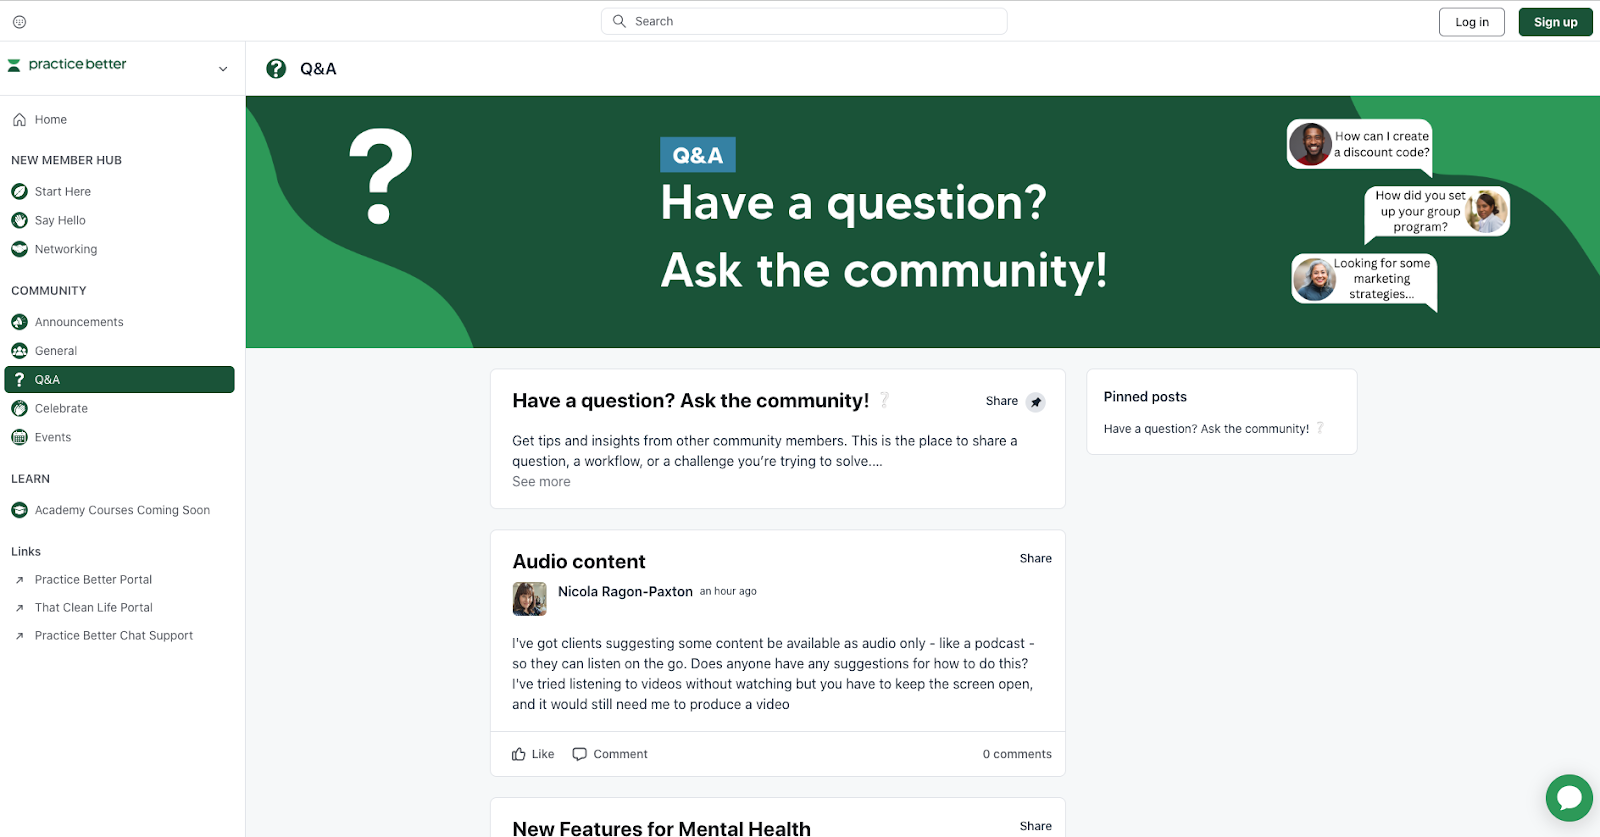 A screenshot of the Practice Better Community showing the Q&A section. 